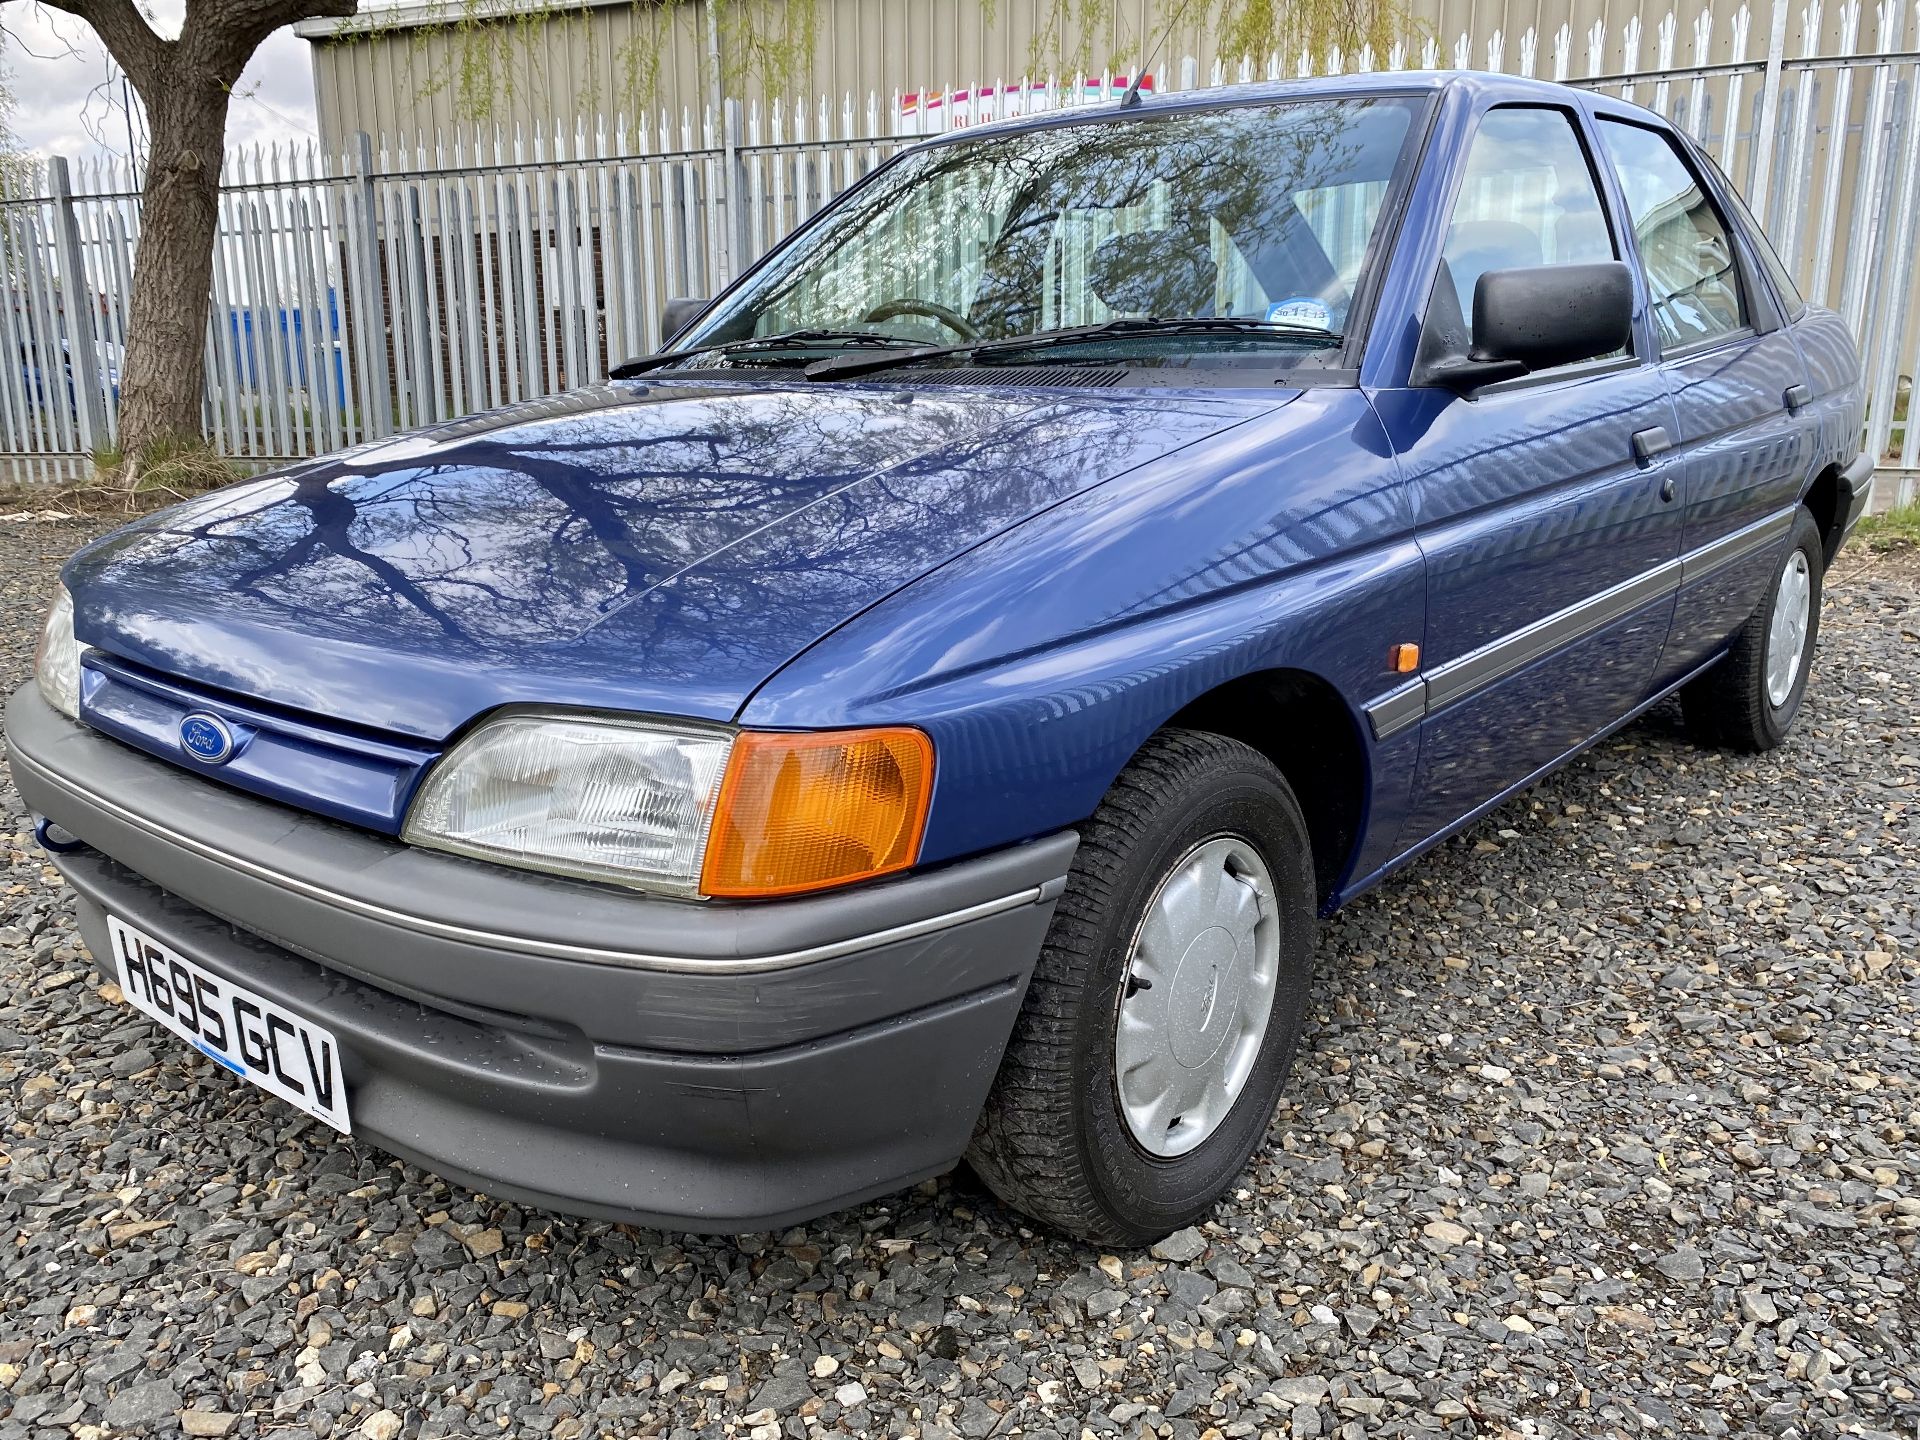 Ford Escort LX1.4 - Image 31 of 54